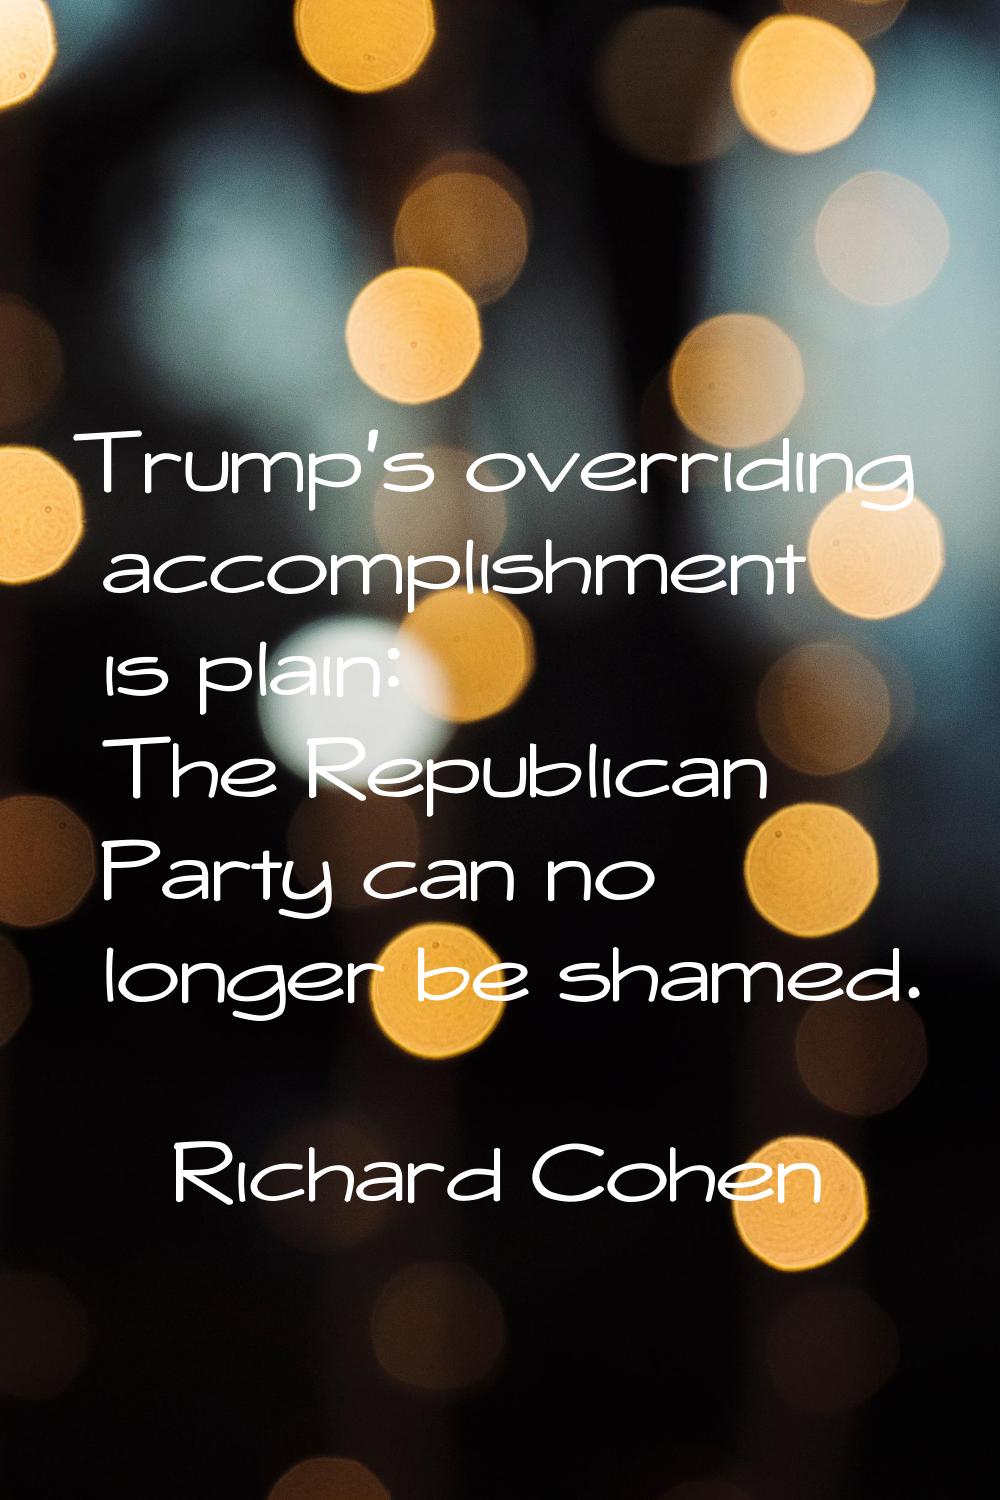 Trump's overriding accomplishment is plain: The Republican Party can no longer be shamed.